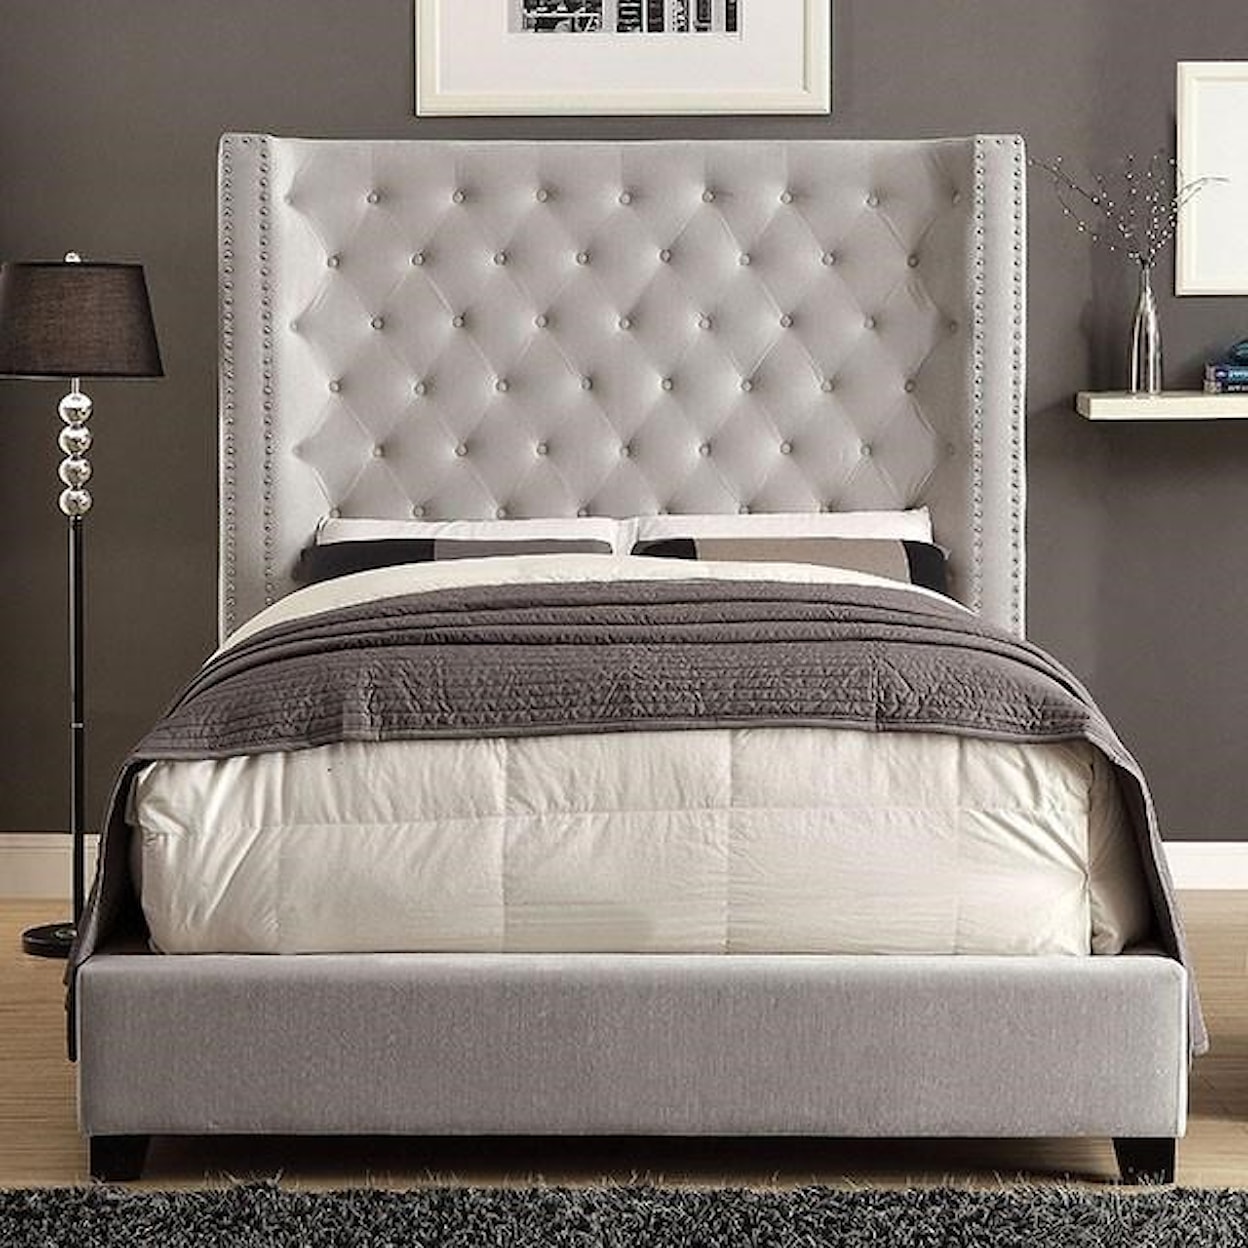 Furniture of America CM7679 Mirabelle Cal King Bed